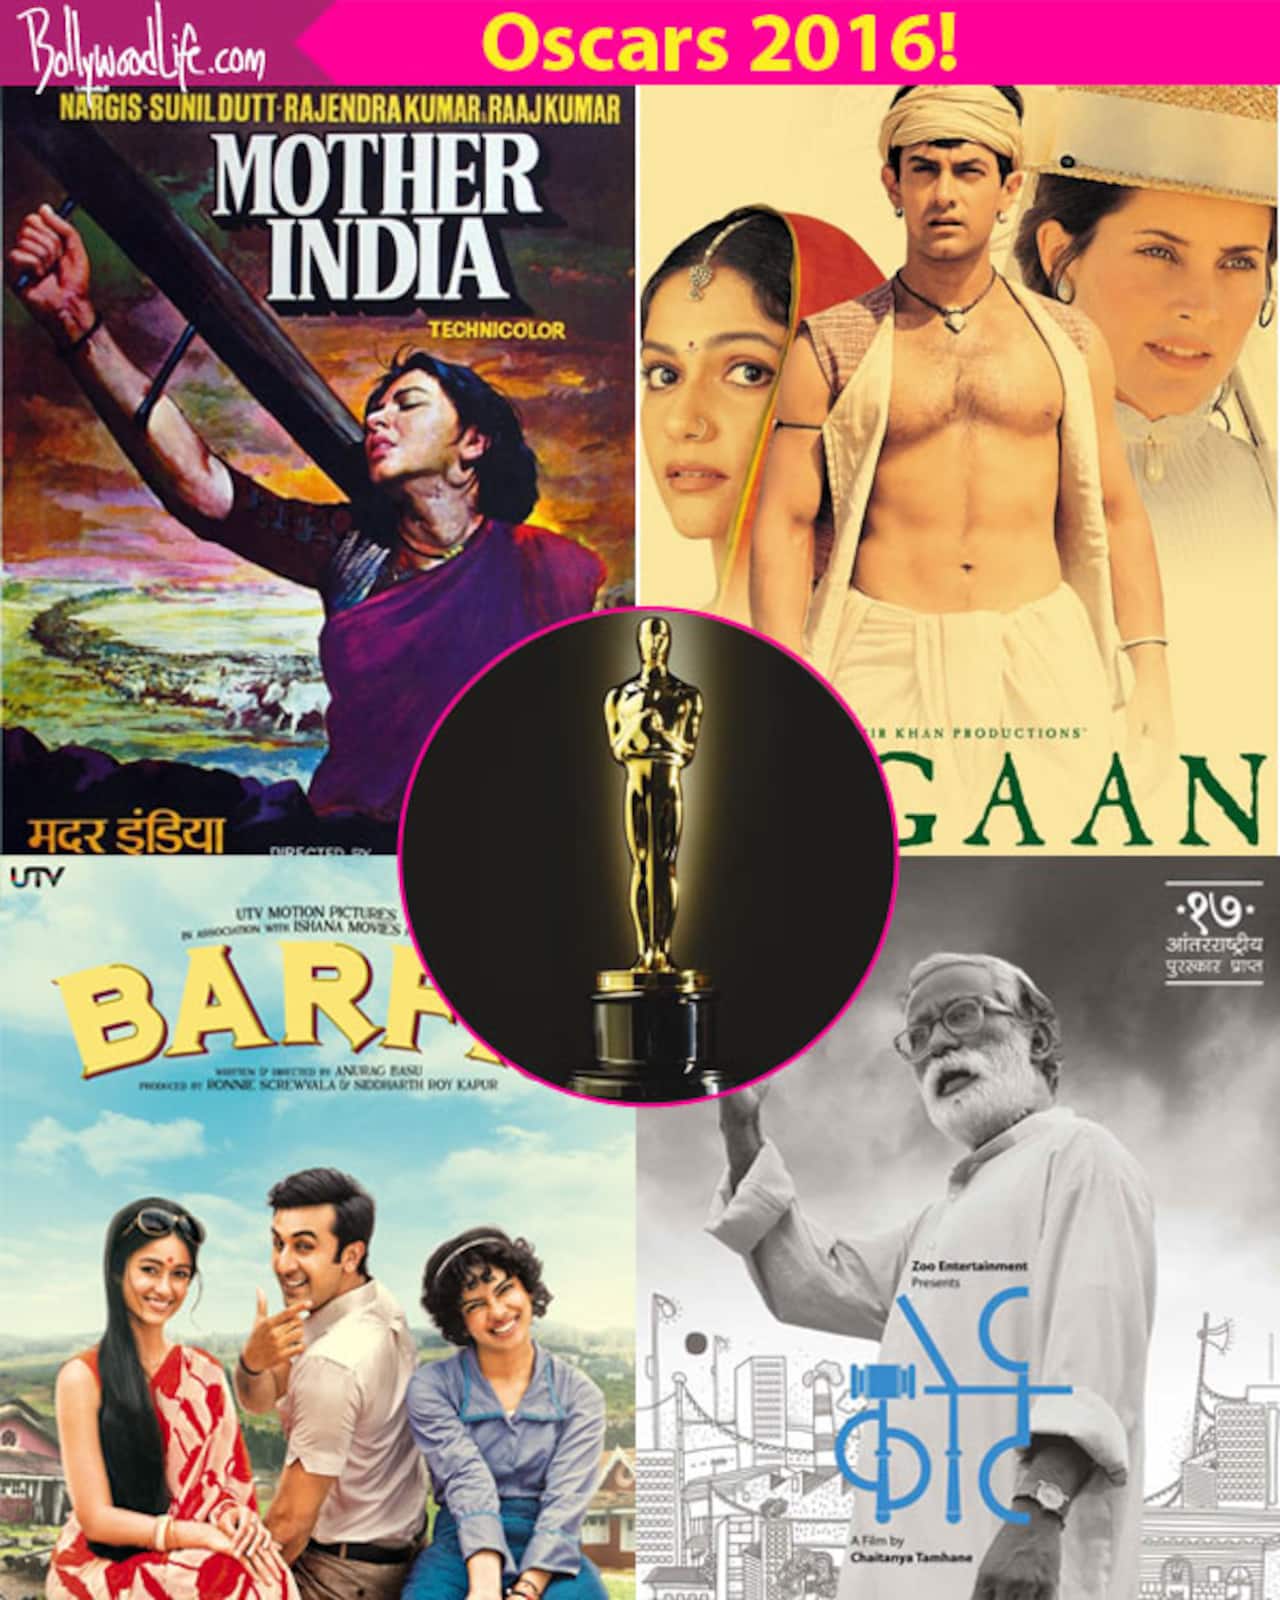 Mother India, Lagaan, Salaam Bombay! check out the complete list of